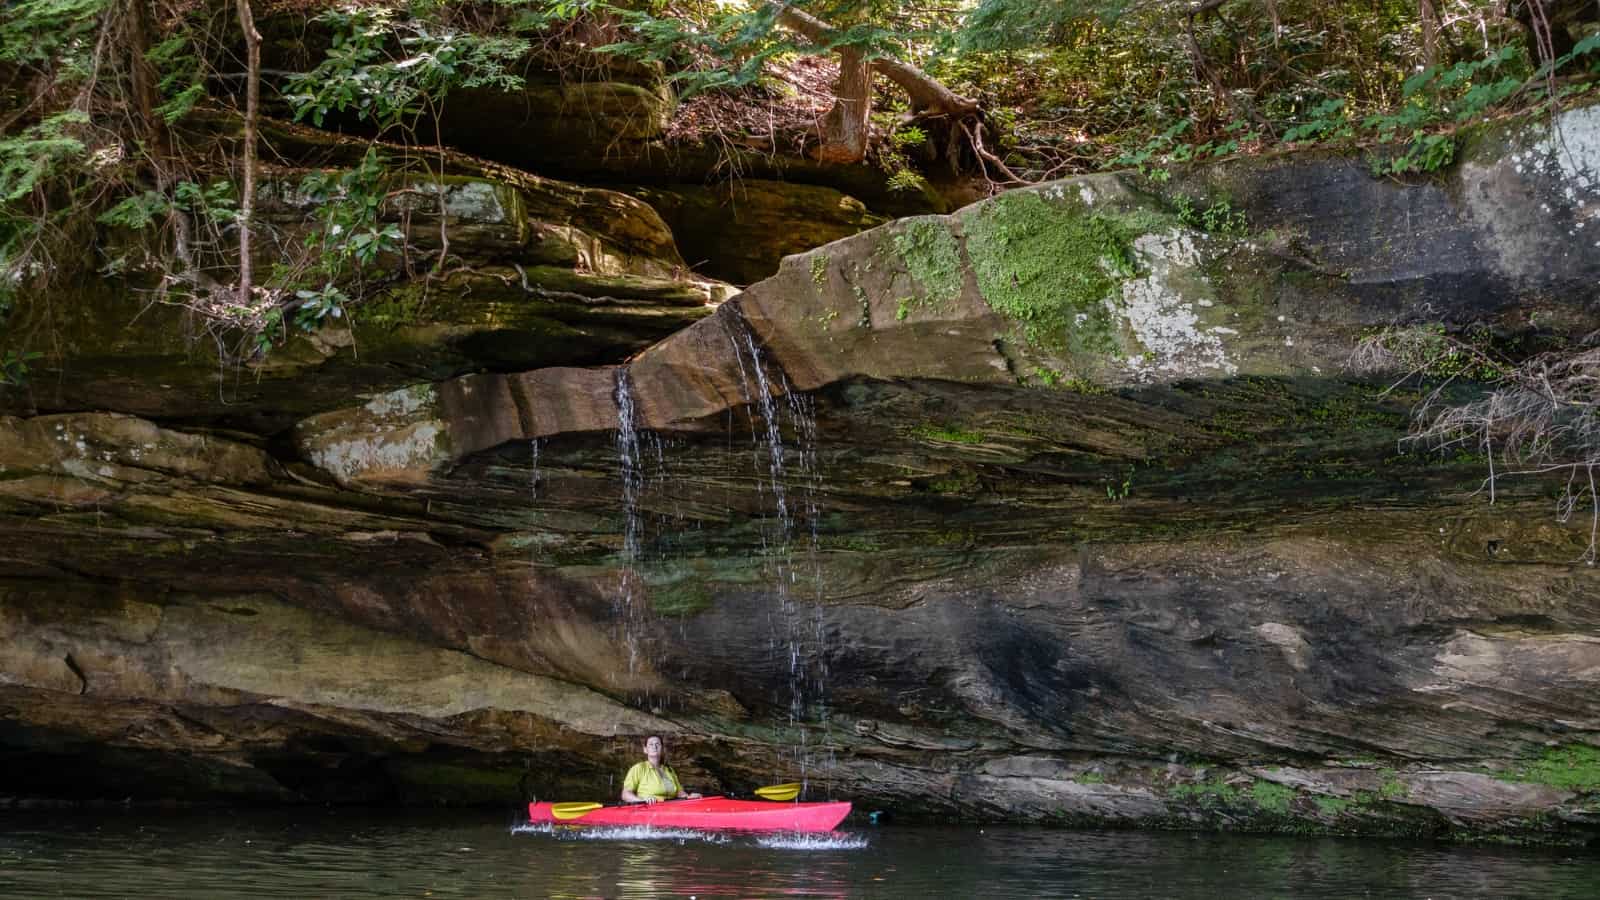 <p>If you’re looking for a unique kayaking experience, the Red River Gorge Underground in Kentucky is a must-visit destination. Here, you can paddle your way through the underground cave system, exploring the captivating features of the Gorge Underground.</p> <p>Led by expert guides, this one-hour tour is perfect for both beginners and experienced kayakers. You’ll be provided with all the necessary gear, including kayaks, lights, paddles, personal flotation devices, helmets, and headlamps.</p> <p>The tour is available year-round, but October is considered the peak time to make the most of the beautiful scenery.</p>